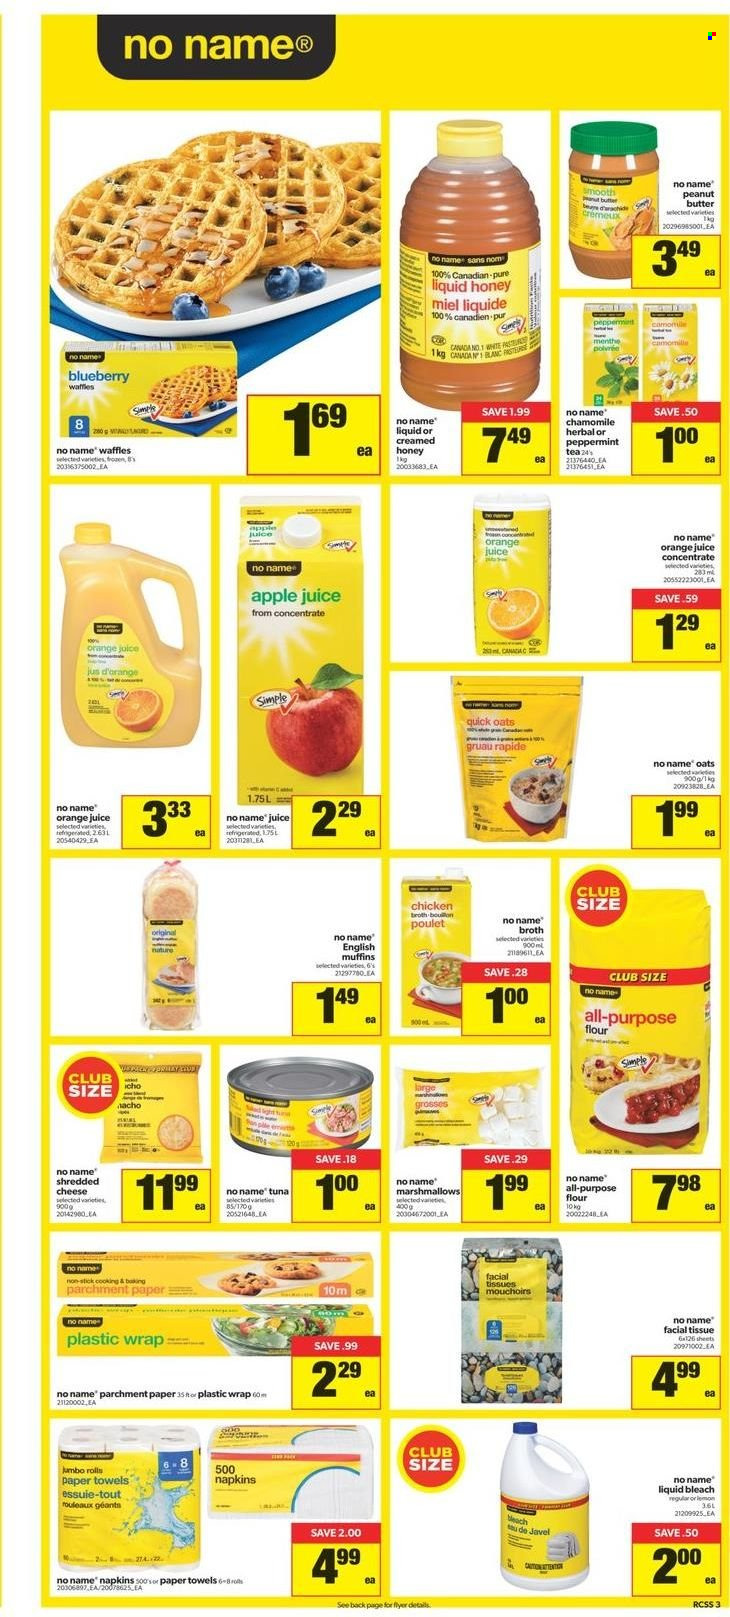 thumbnail - Real Canadian Superstore Flyer - December 30, 2021 - January 05, 2022 - Sales products - english muffins, waffles, tuna, No Name, shredded cheese, marshmallows, flour, oats, broth, Quick Oats, honey, peanut butter, apple juice, orange juice, juice, tea, napkins, tissues, kitchen towels, paper towels, bleach, facial tissues. Page 3.